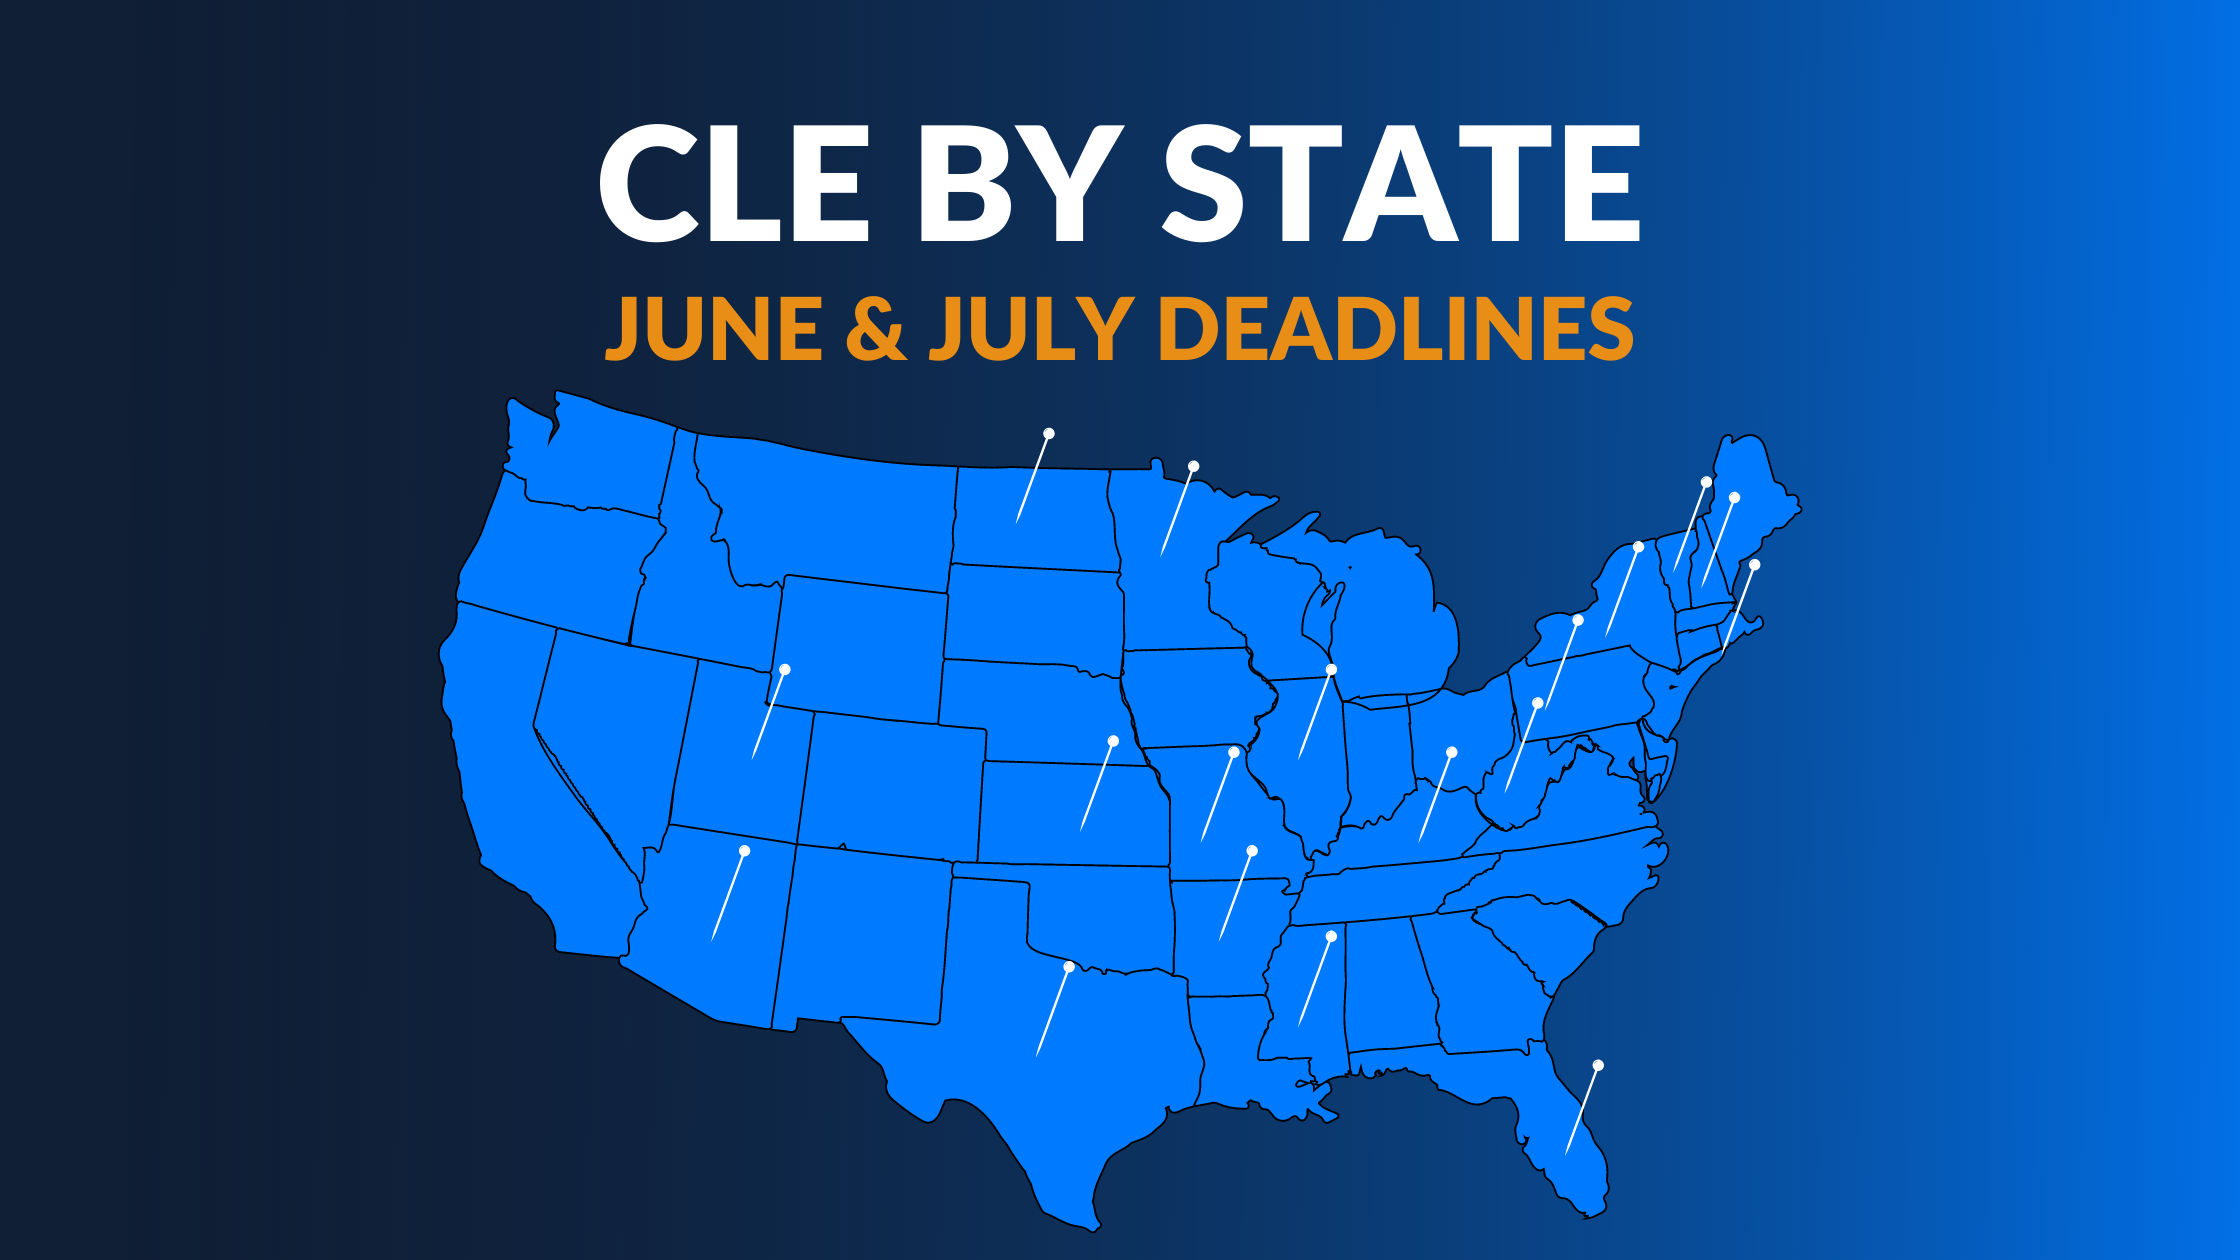 Summer CLE Deadlines by State